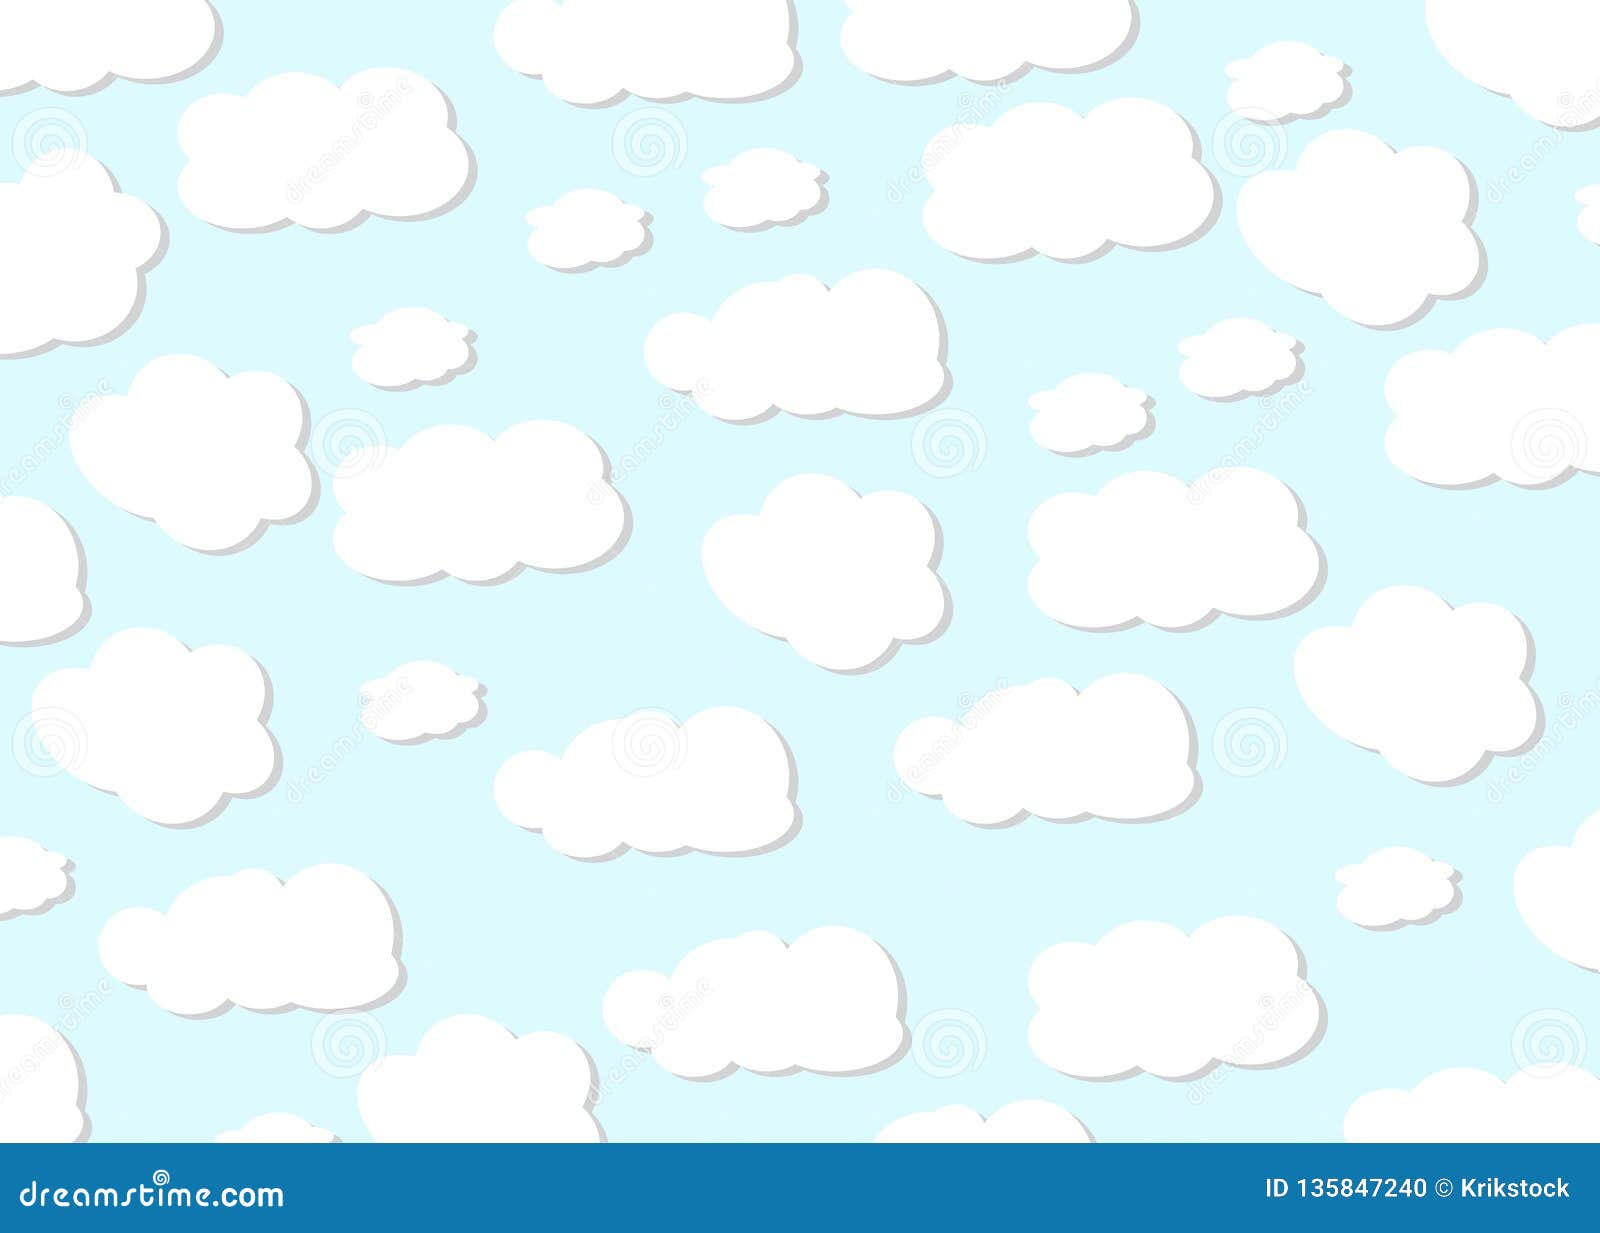 Cloud Design Baby Background Blue Sky With Clouds Vector Illustration Eps 10 Stock Vector Illustration Of Design Silhouette